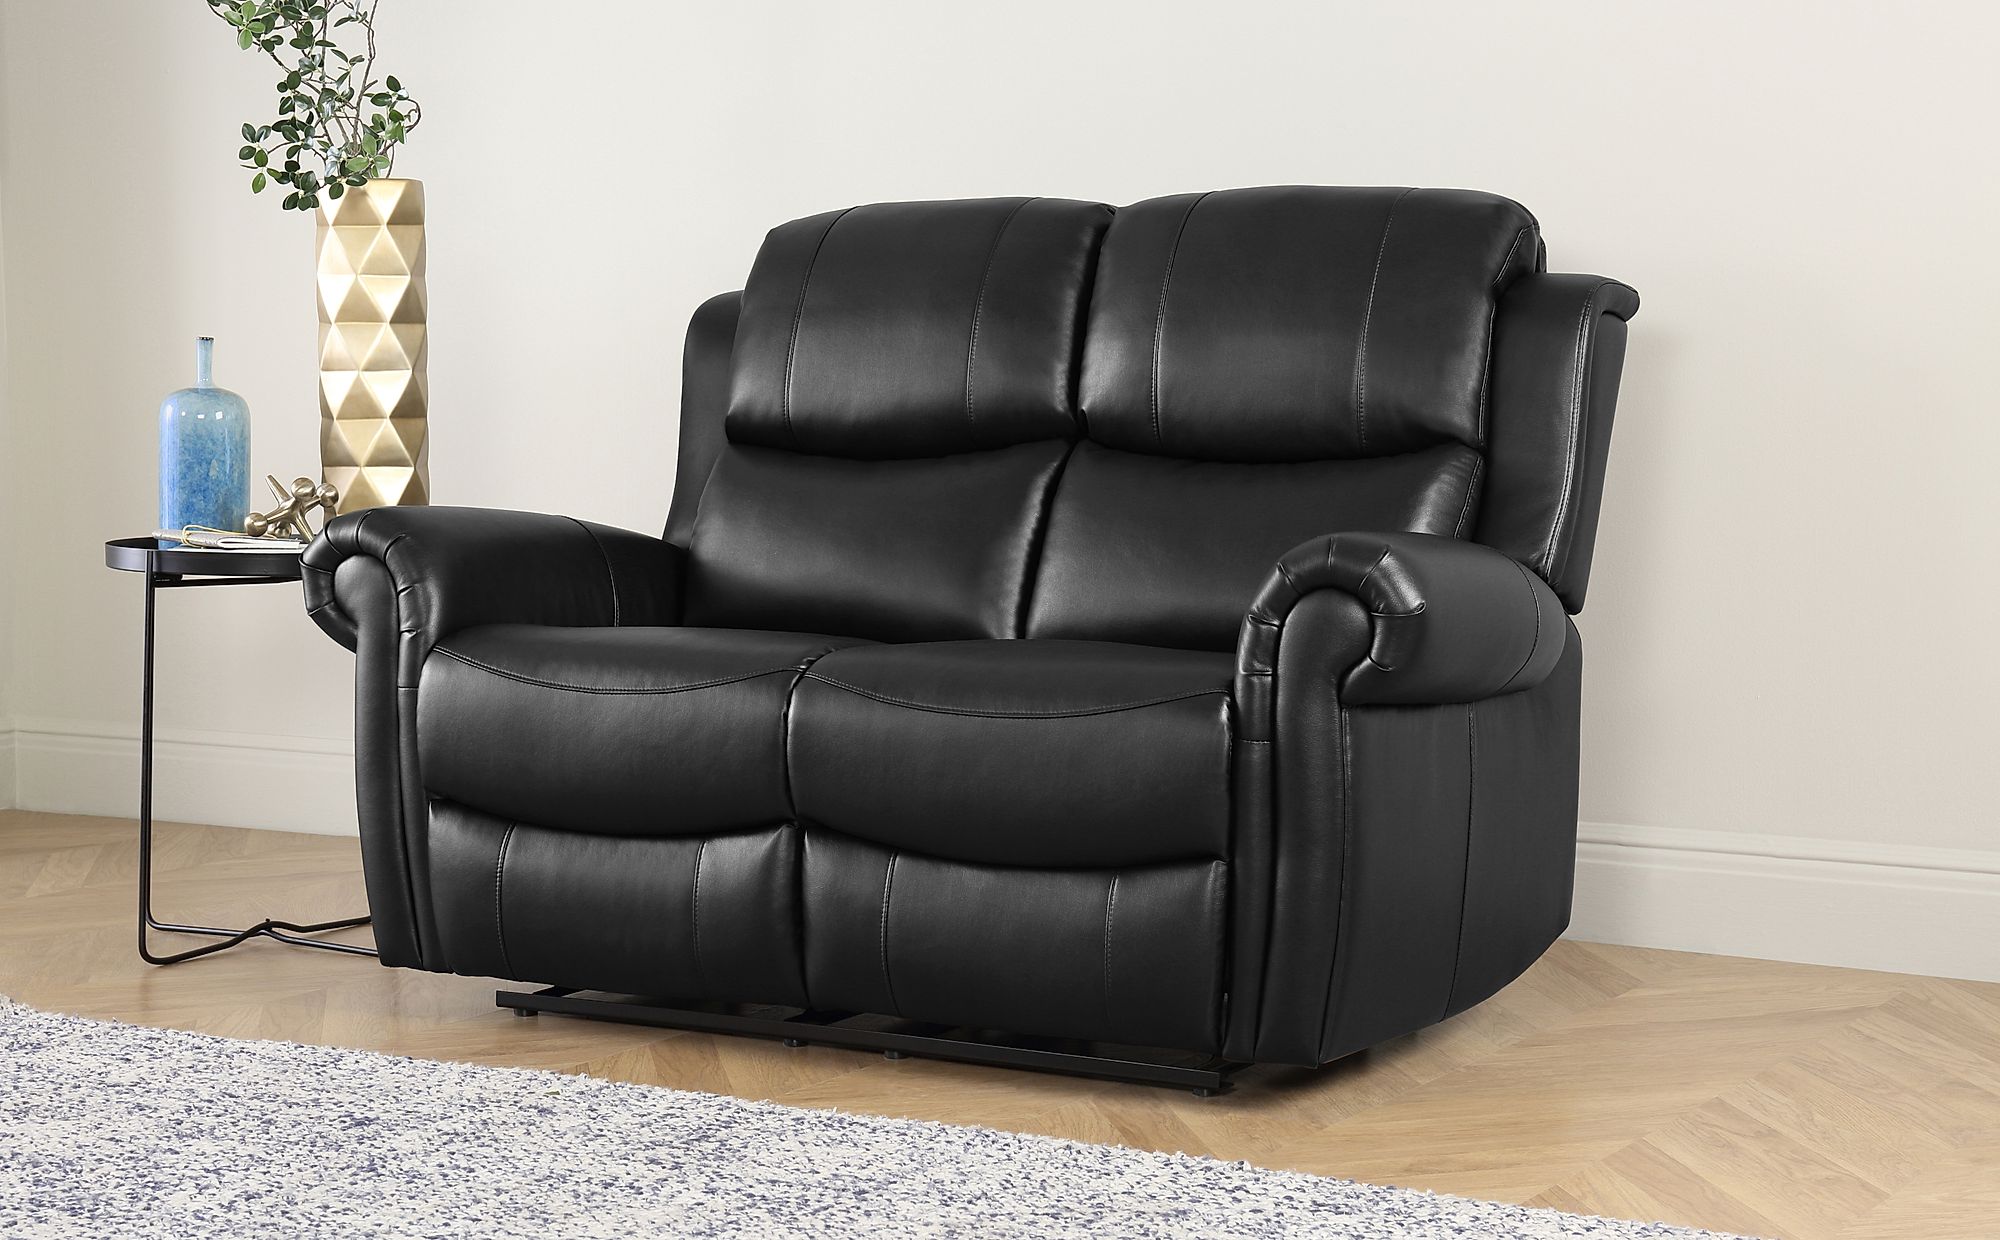 Hadlow Black Leather 2 Seater Recliner Sofa Only £499.99